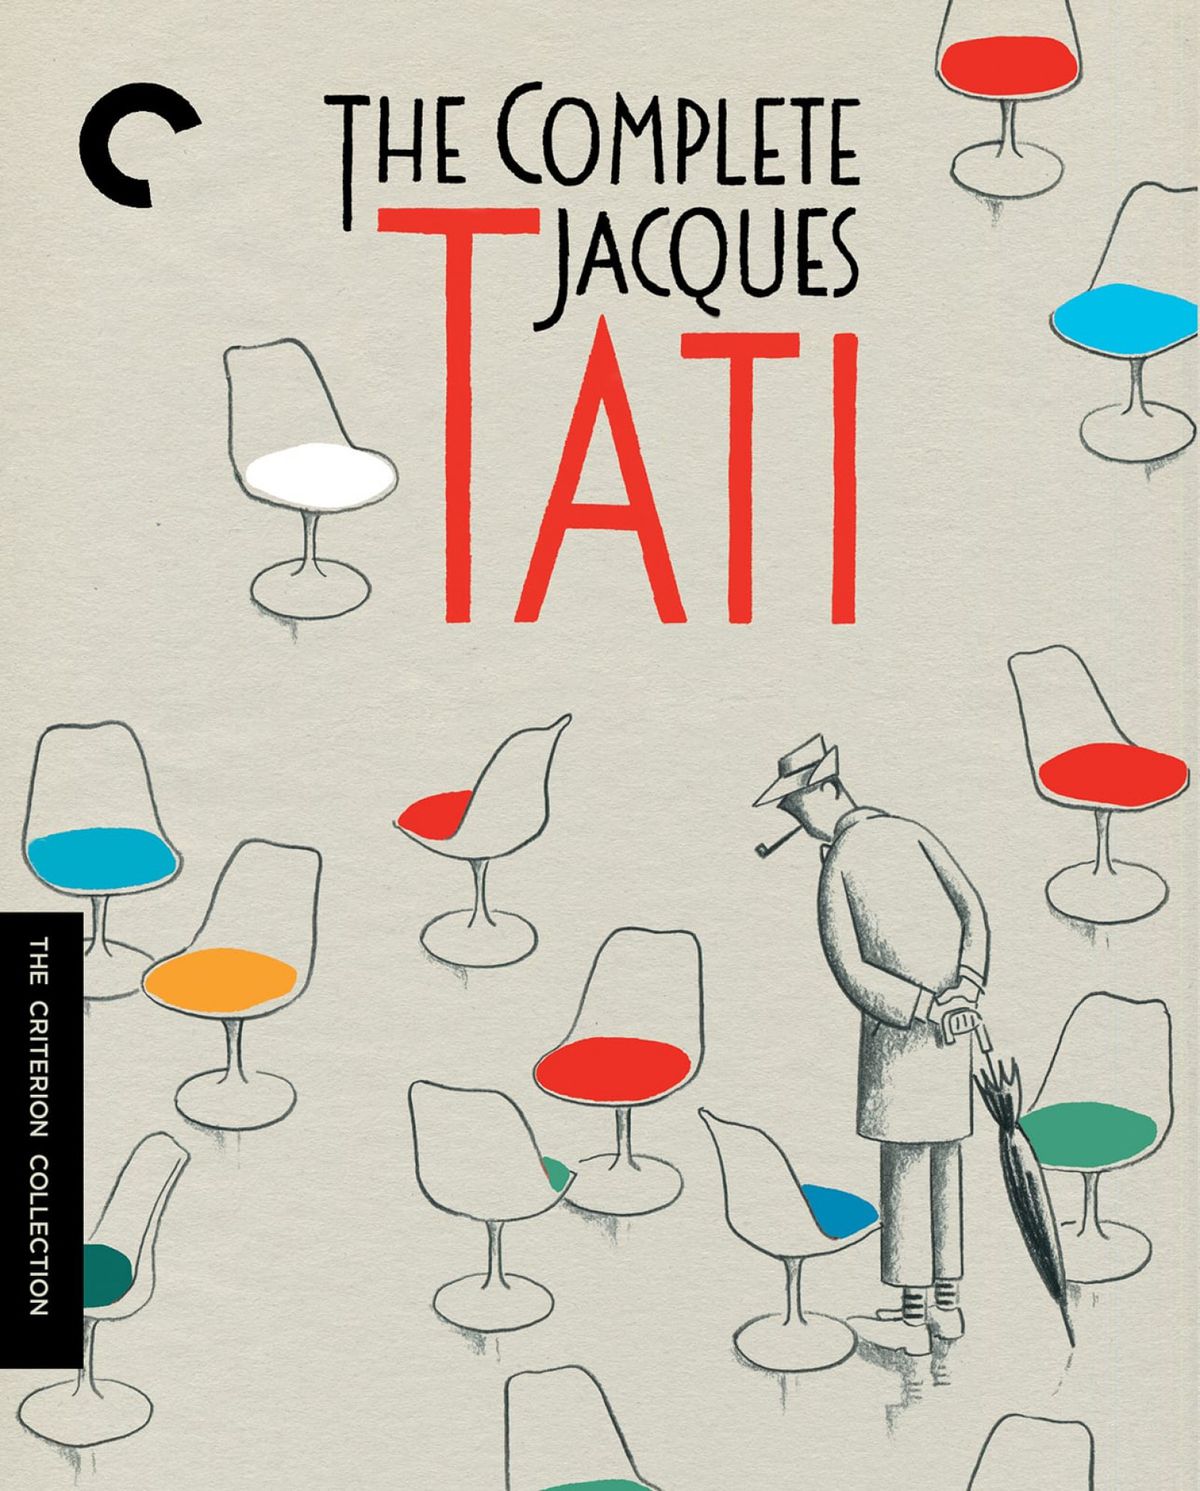 Cover art for the Criterion Collection box set of The Complete Jacques Tati.